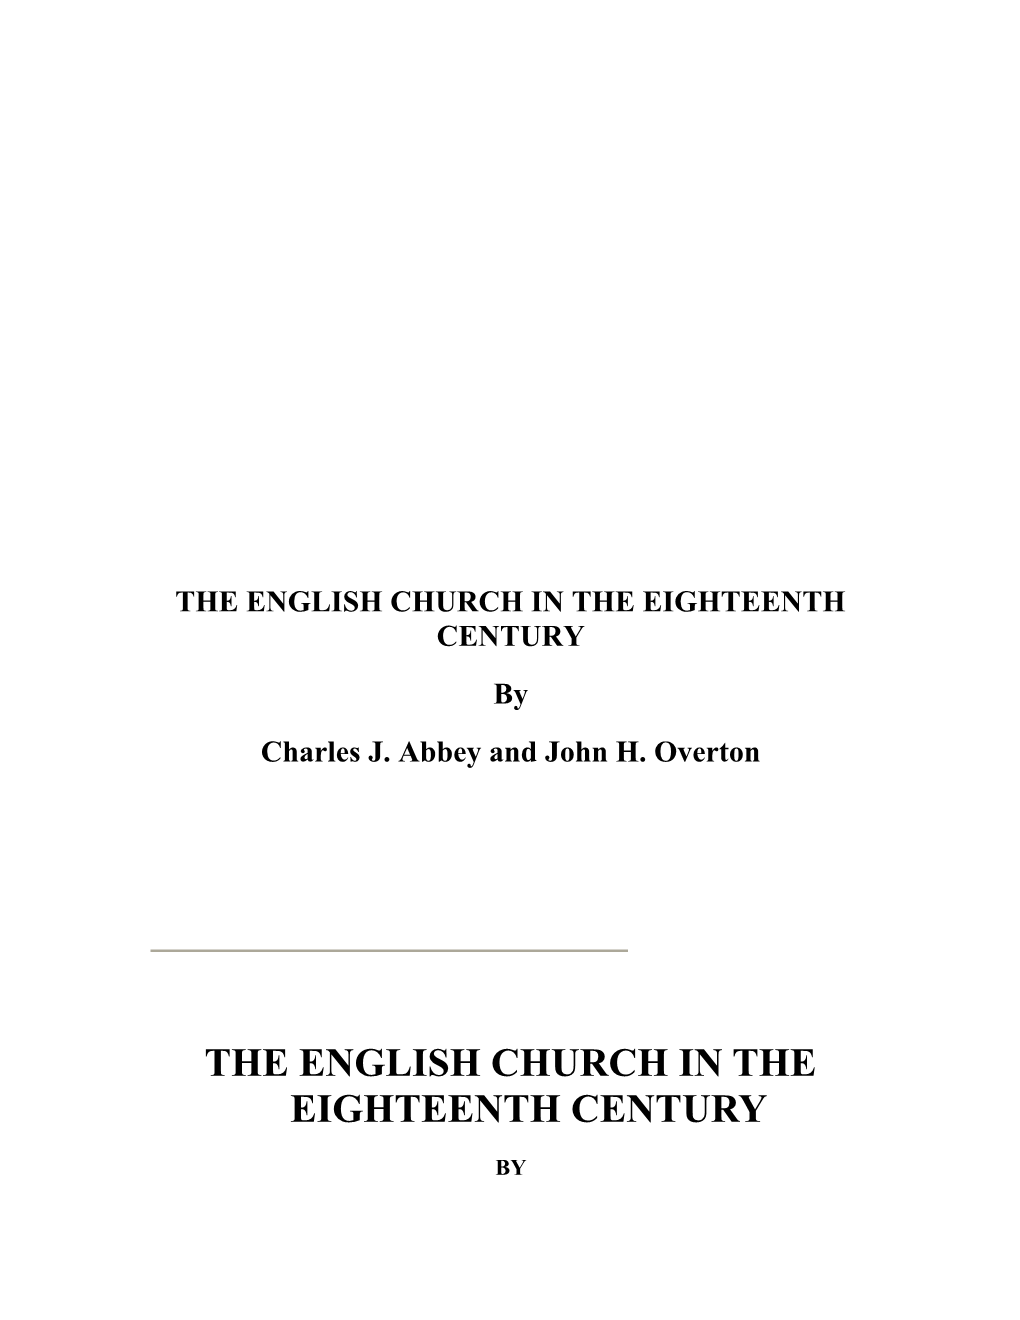 THE ENGLISH CHURCH in the EIGHTEENTH CENTURY by Charles J. Abbey and John H. Overton